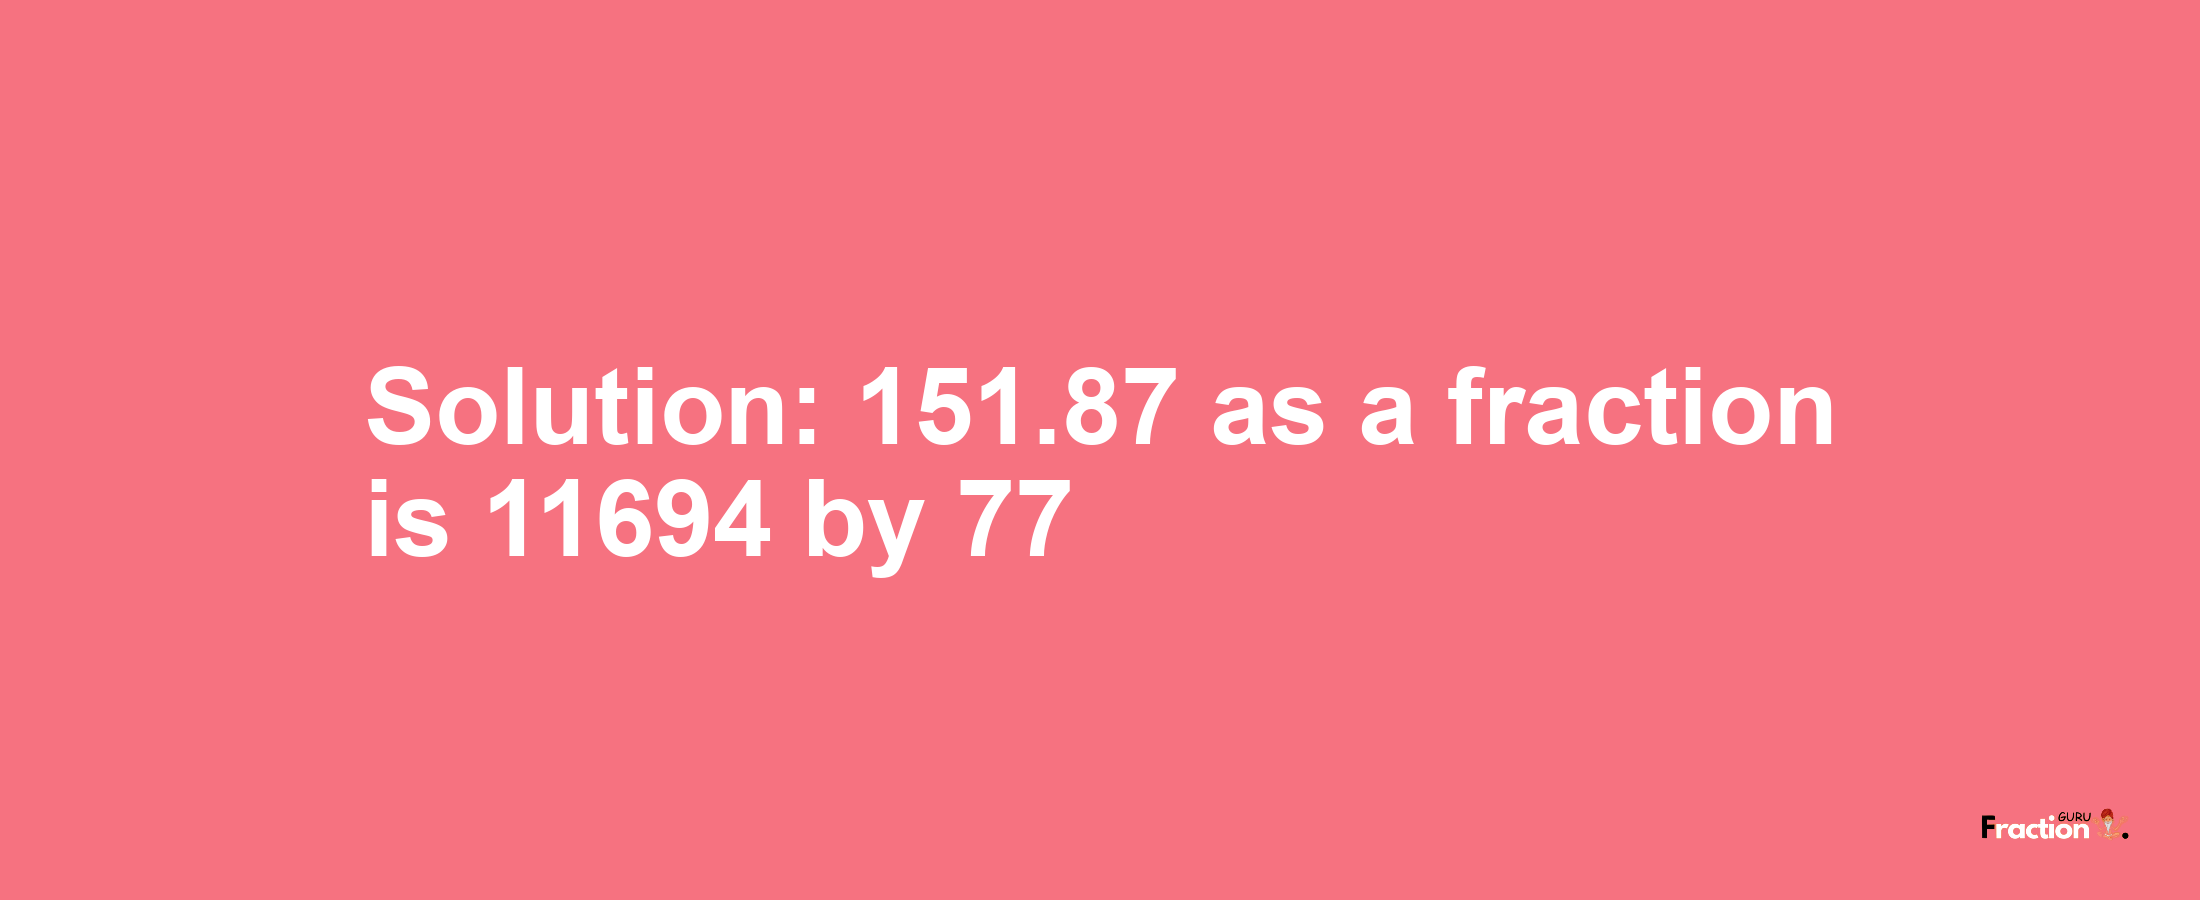 Solution:151.87 as a fraction is 11694/77